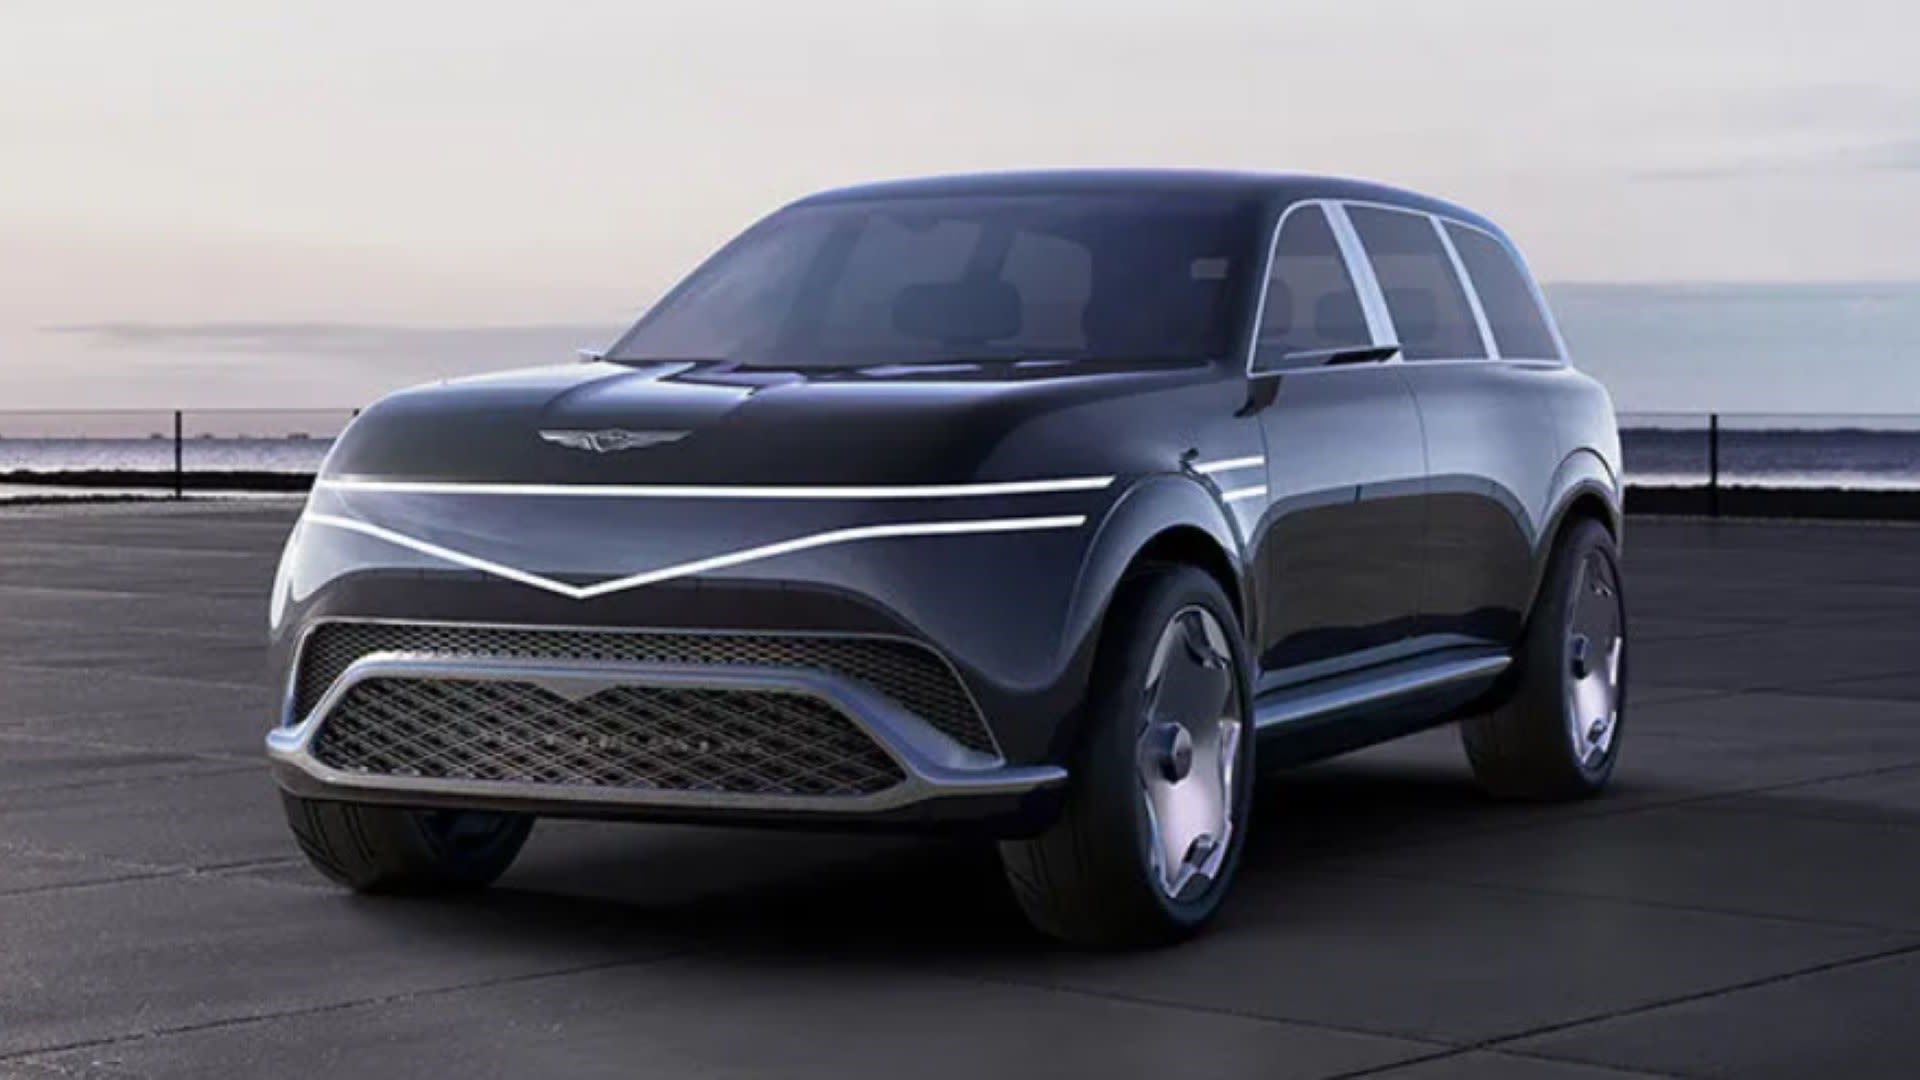 Automaker will begin production on its first-ever full-size luxury EV next year to rival major brands: 'It's the epitome of timeless design'